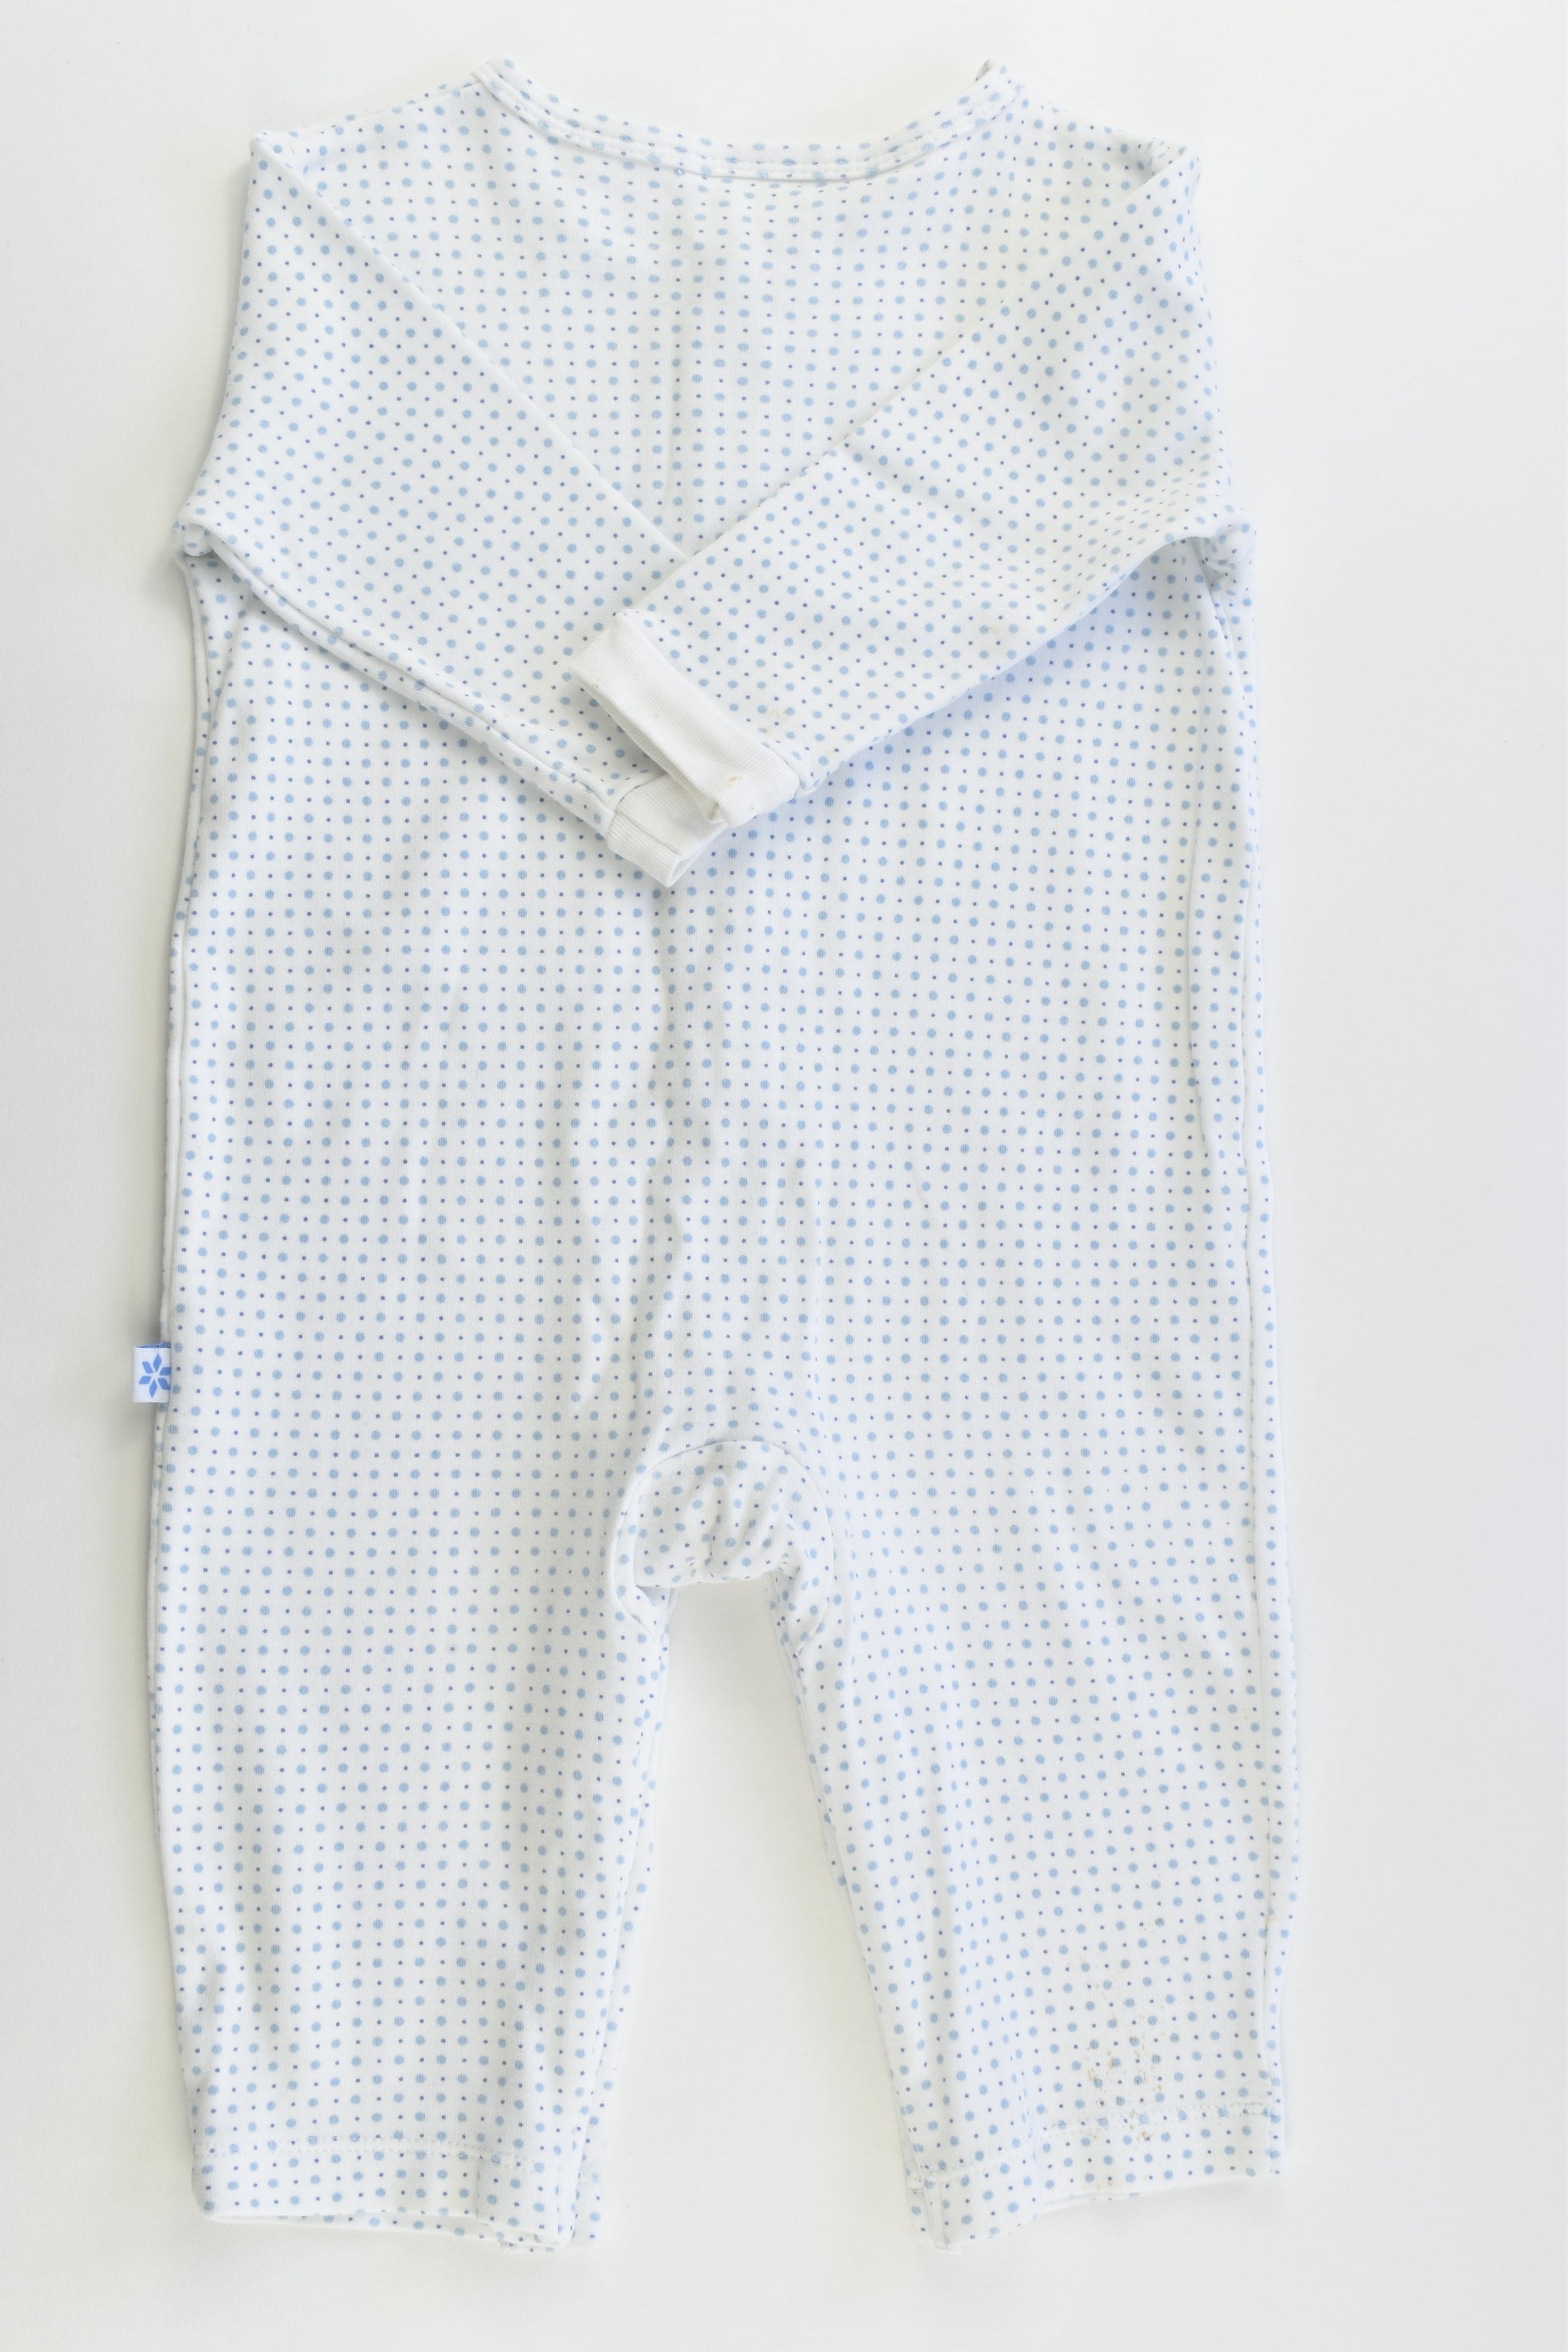 Marquise Size 0 (6-12 months) Dots Romper